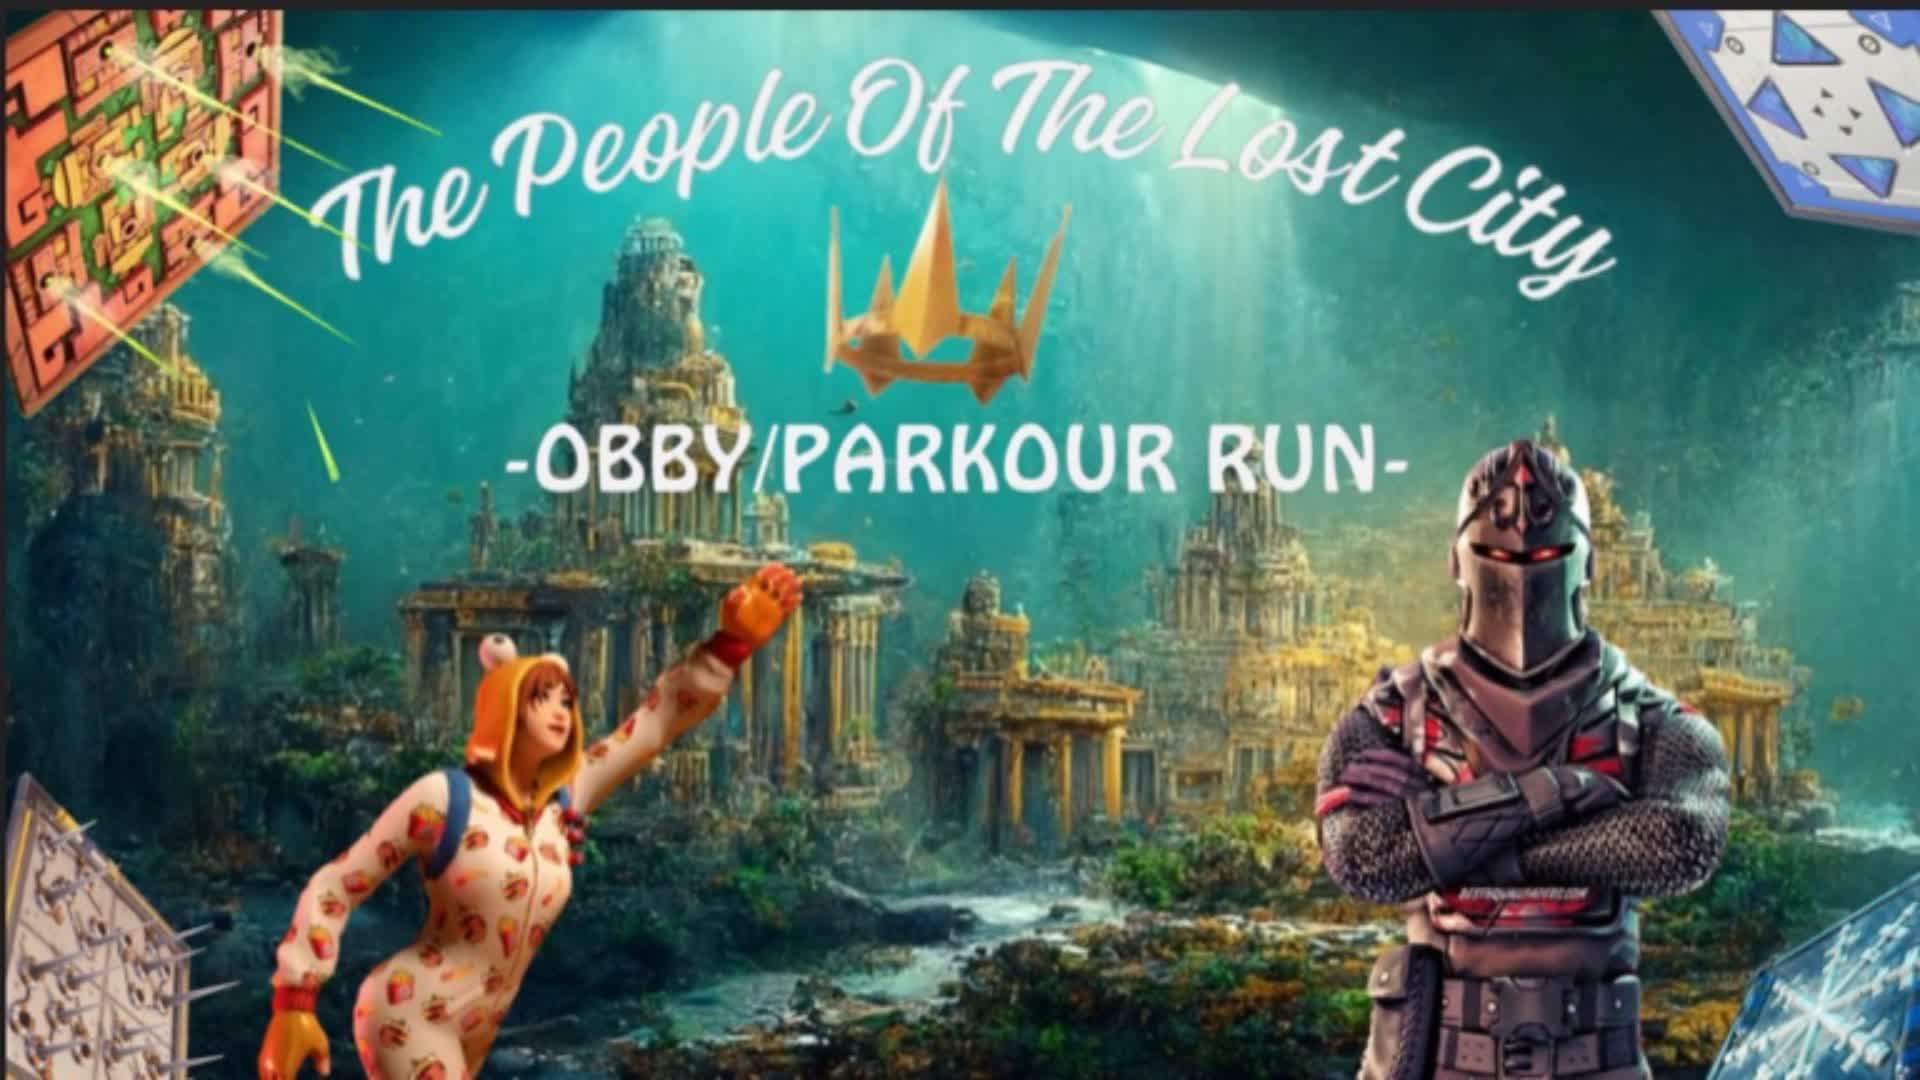 People Of The Lost City - Parkour/OBBY